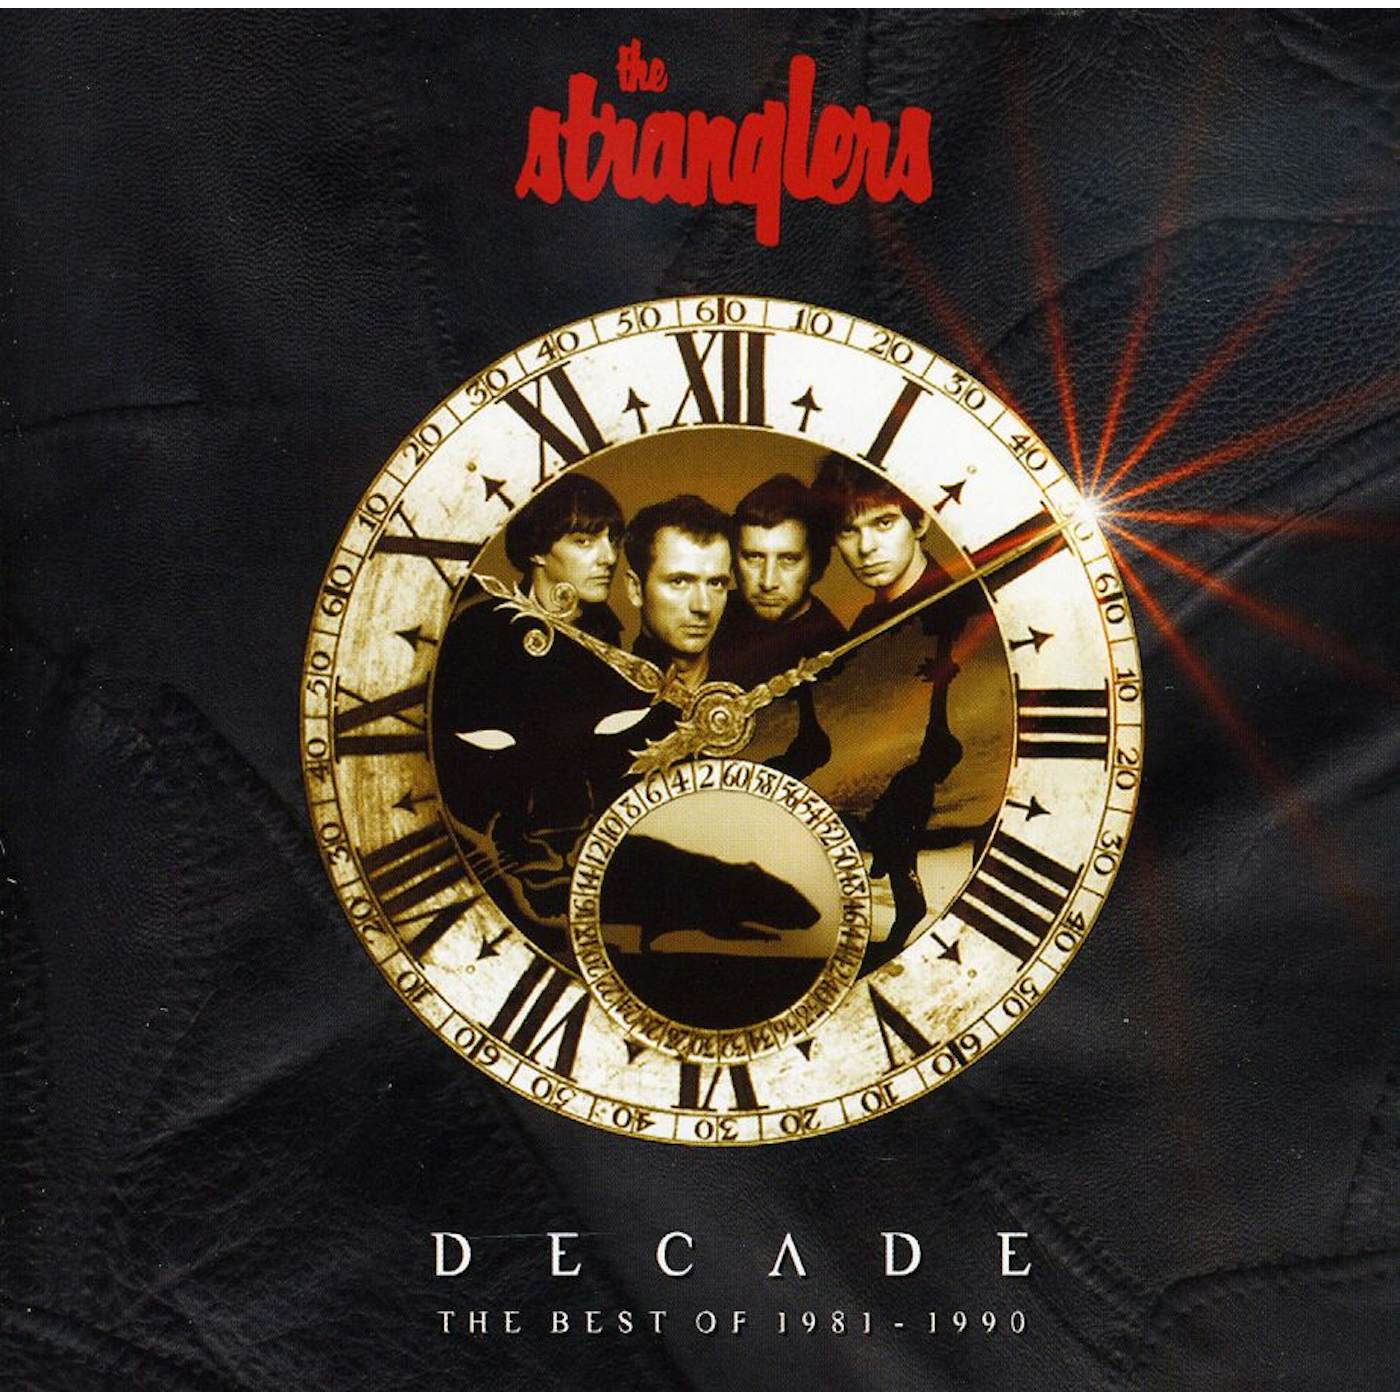 The Stranglers DECADE: BEST OF 1981-1990 CD